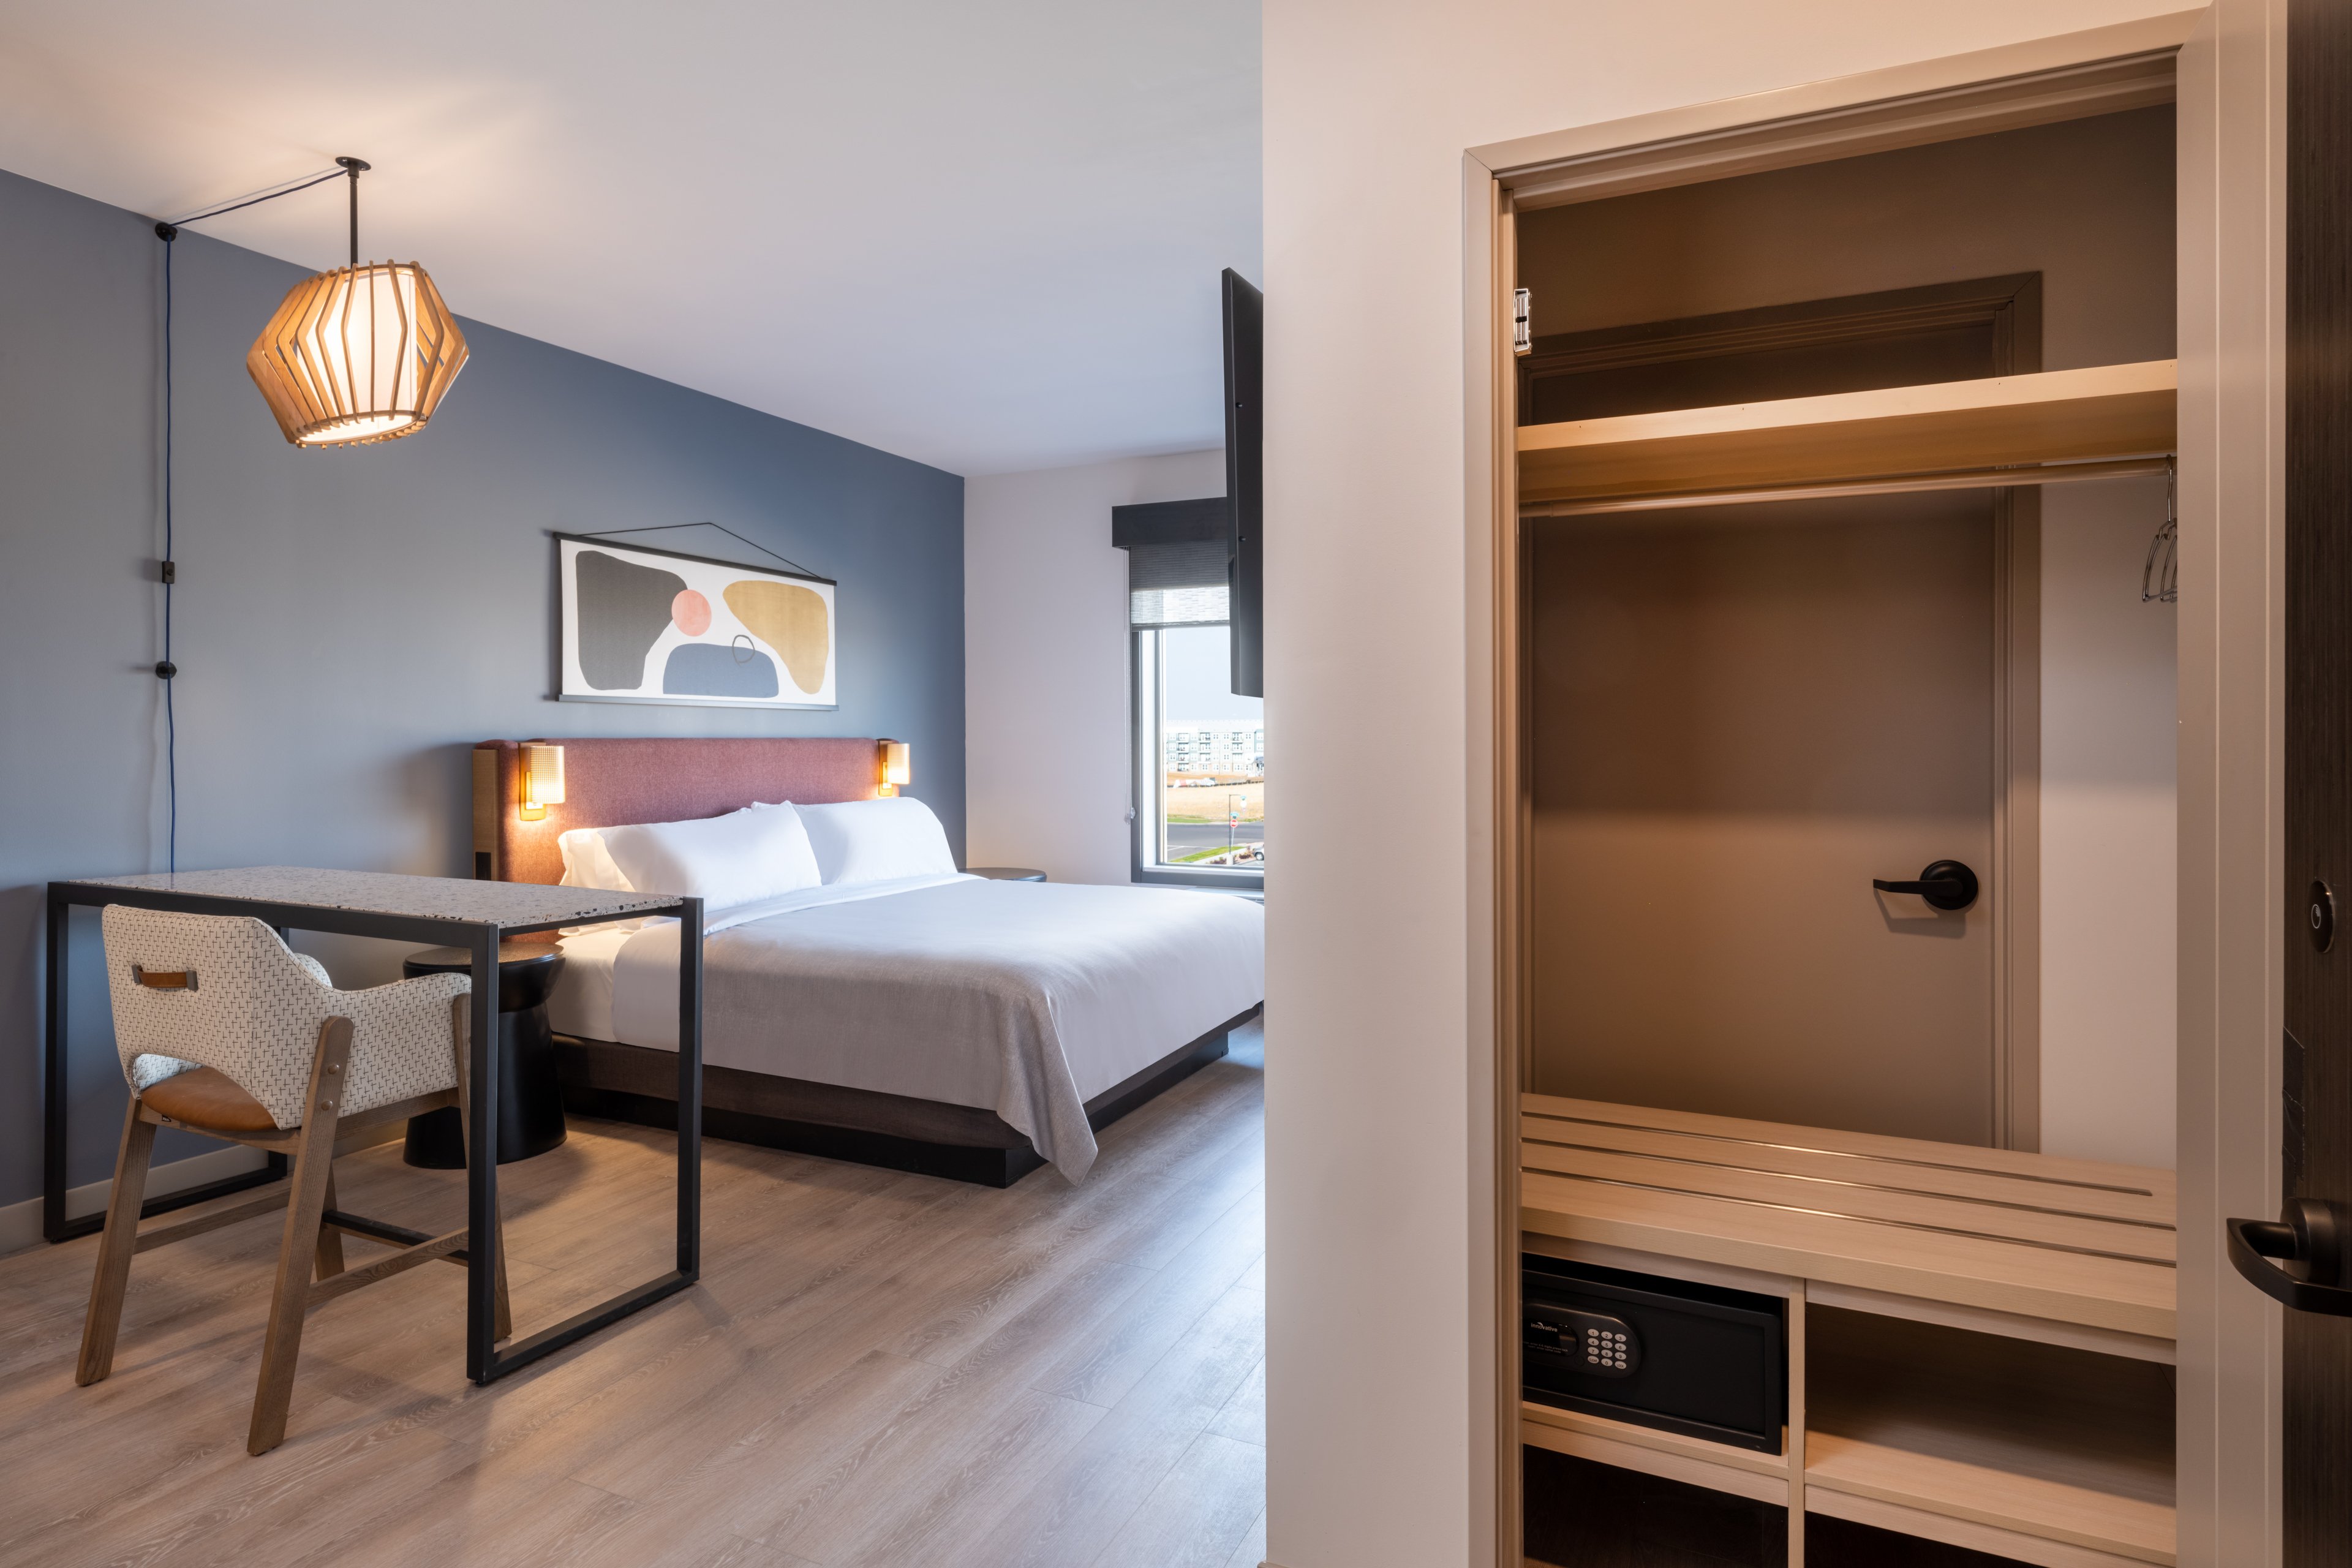 Our stylish suites provide plenty of closet space to unpack